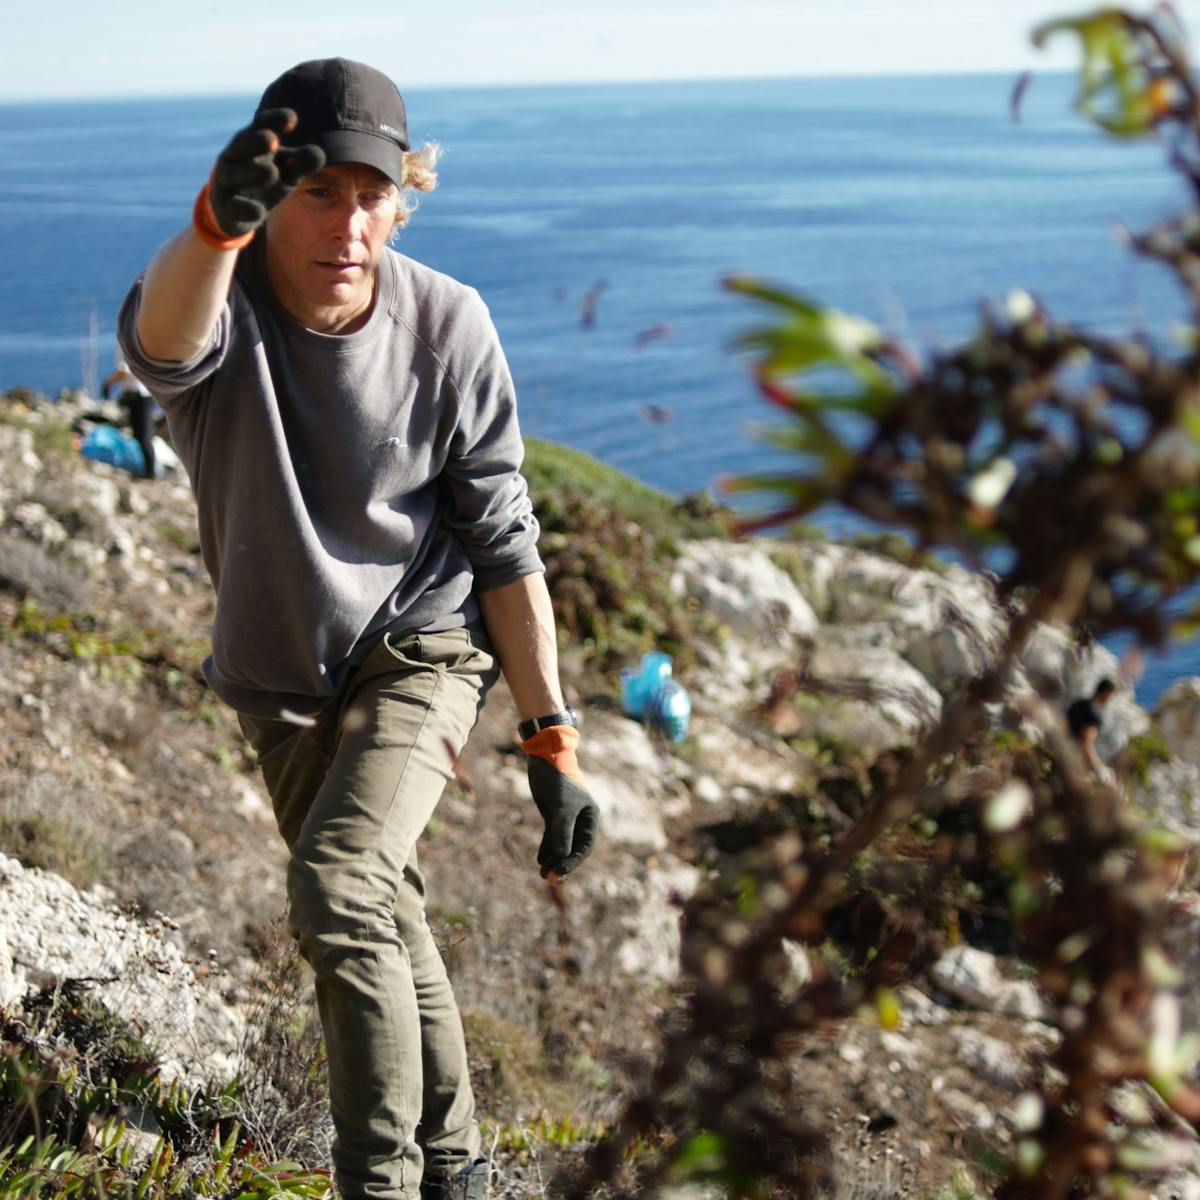 Matt, Mossy Earth co-founder, removing the invasive ice plant from the cliff area where we are striving to protect endangered plants. 